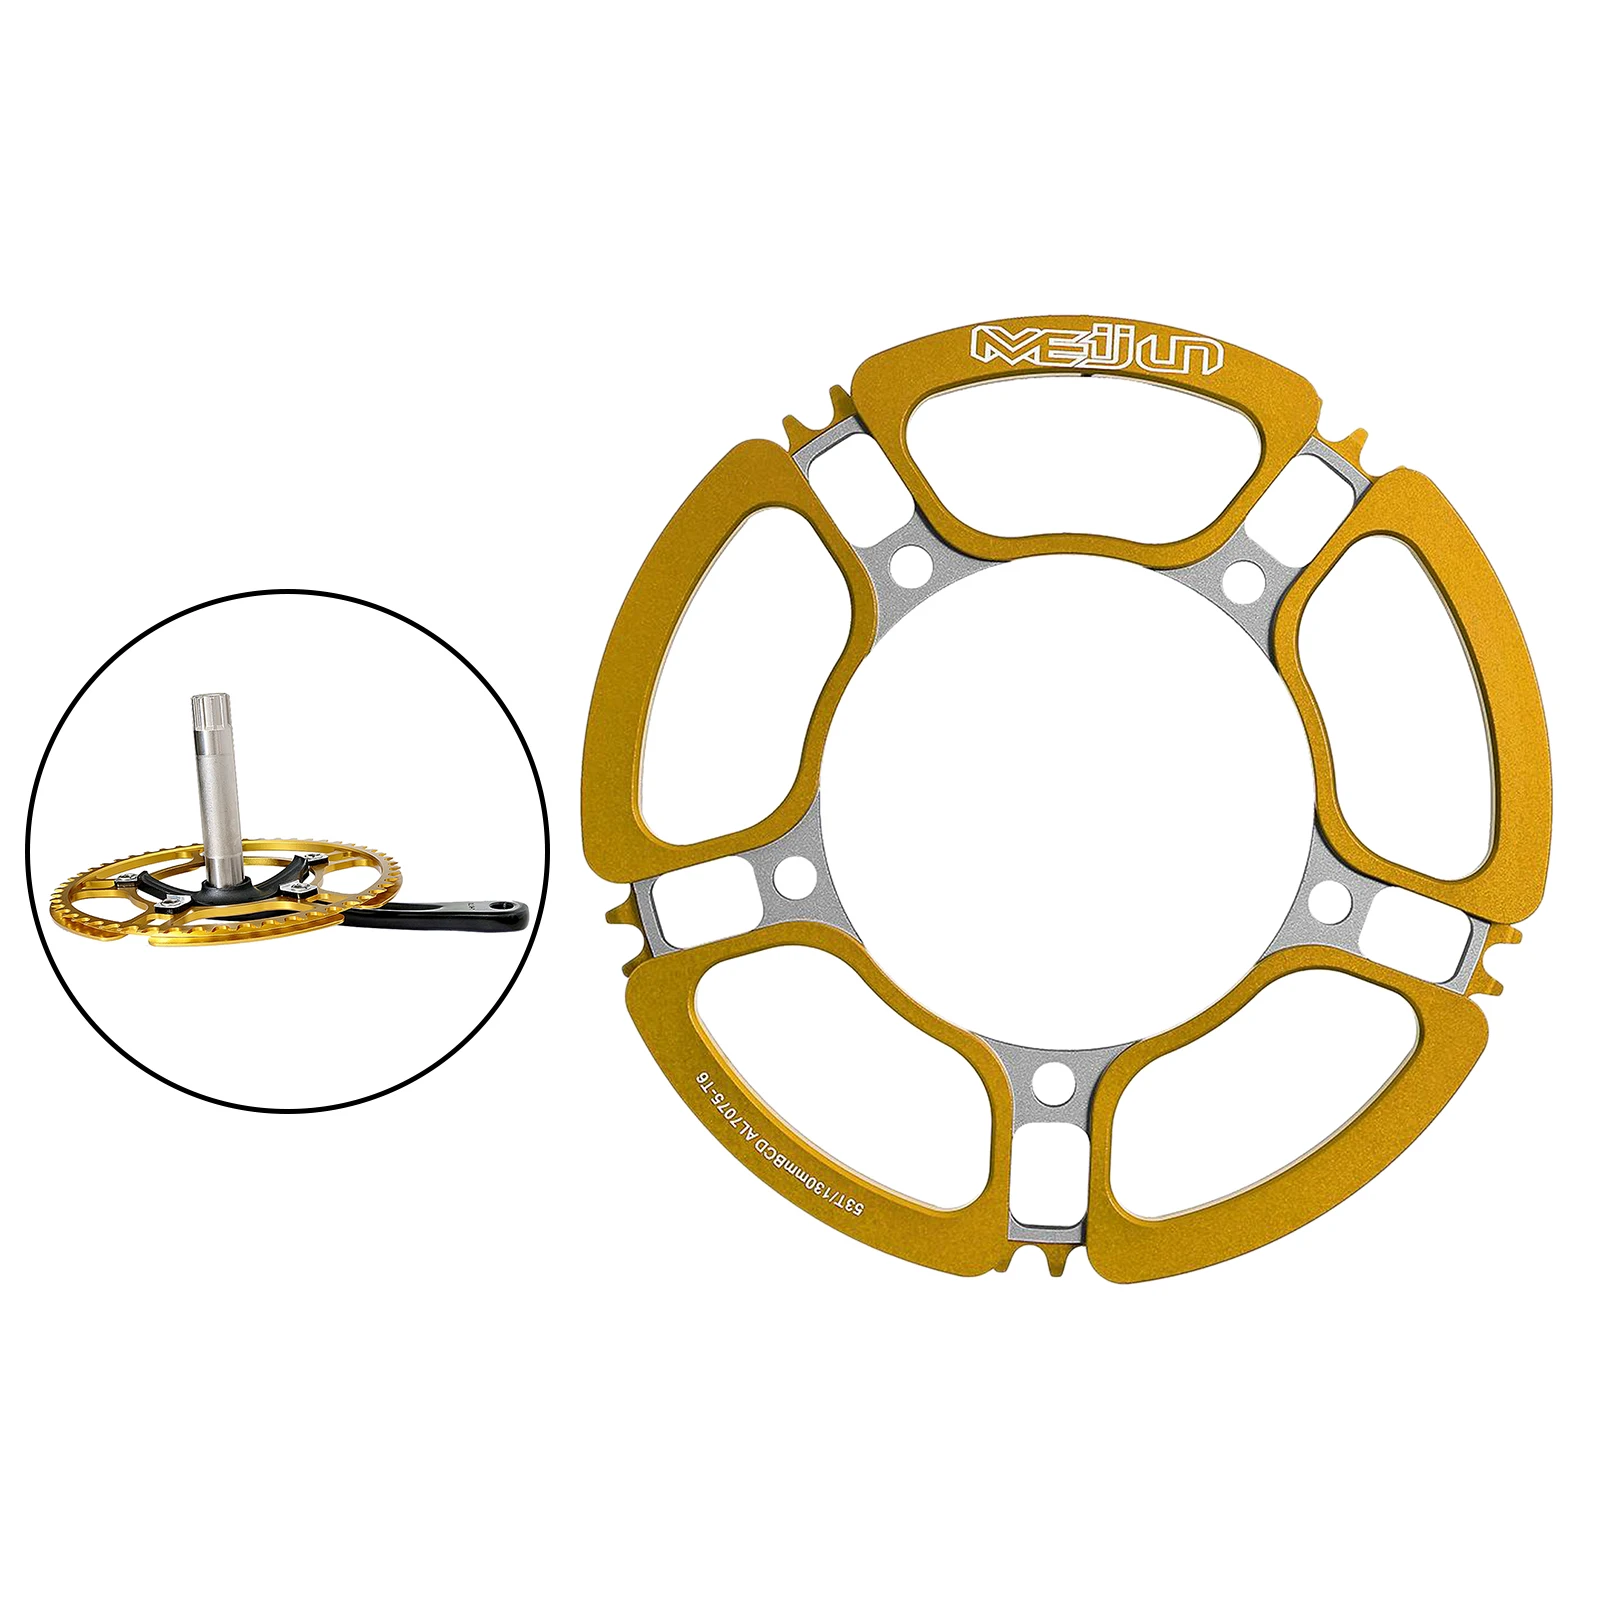 1 Piece  Road  Chainring Round Narrow Wide Single Chain  BCD 130mm 53T, Bike Replace Accessories